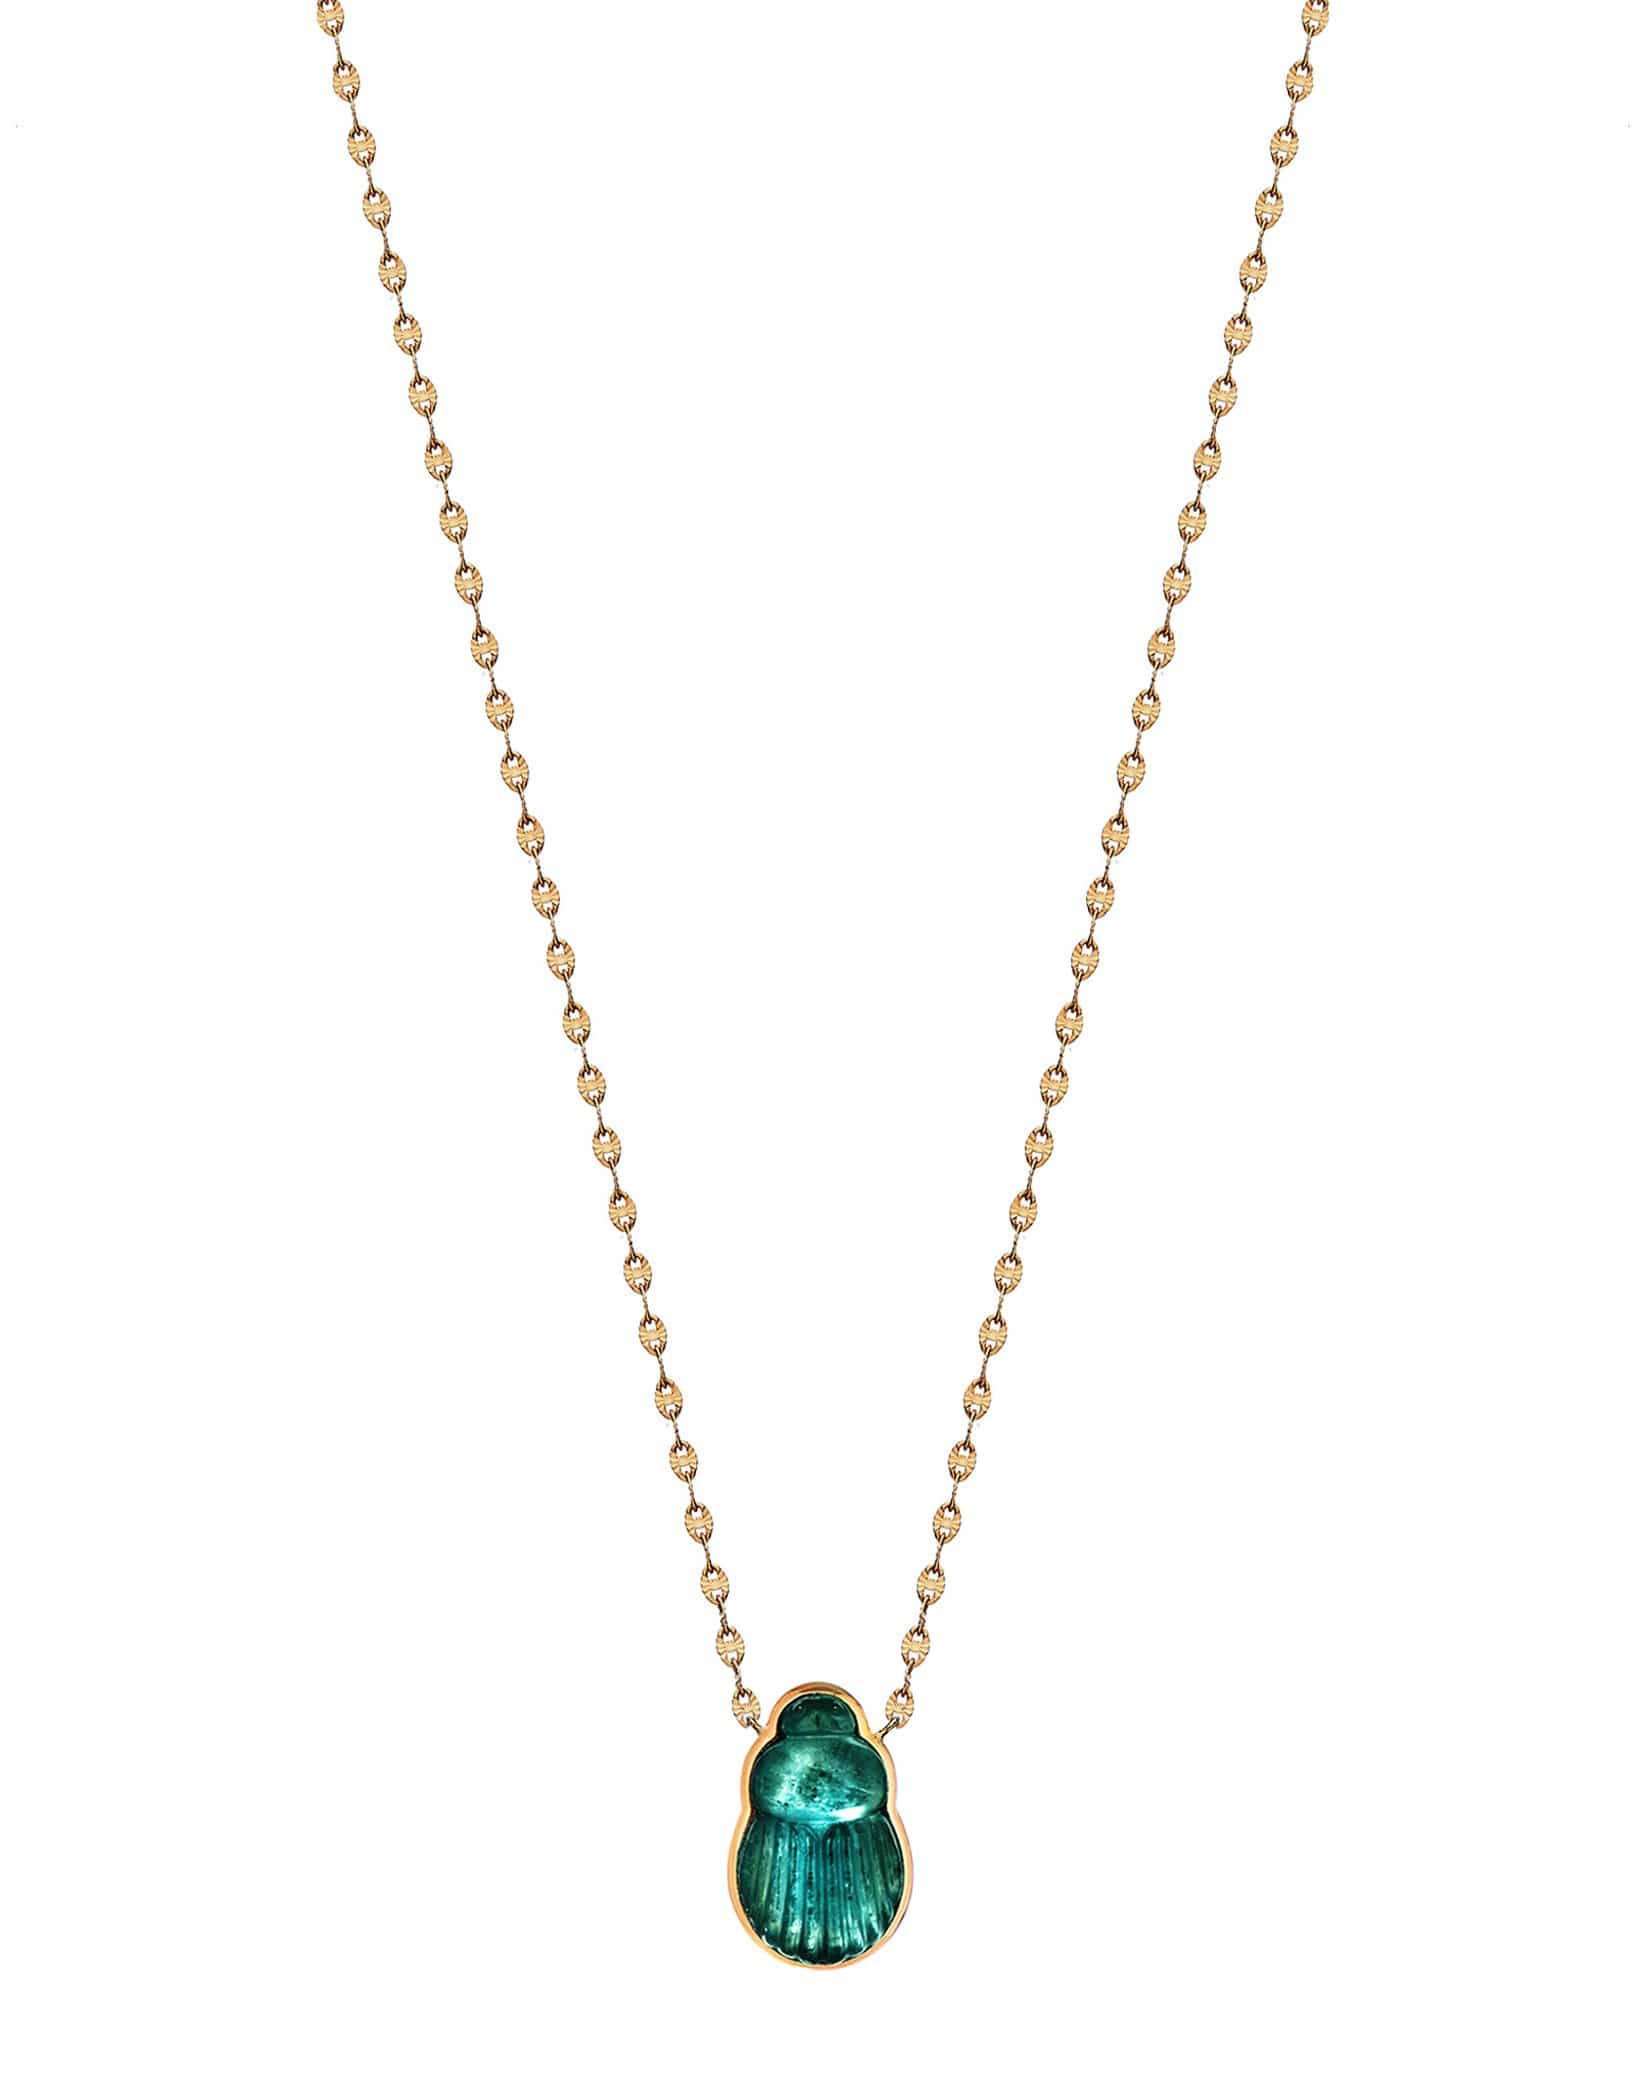 LITO-Large Sienna Green Chalcedony Scarab Necklace-YELLOW GOLD